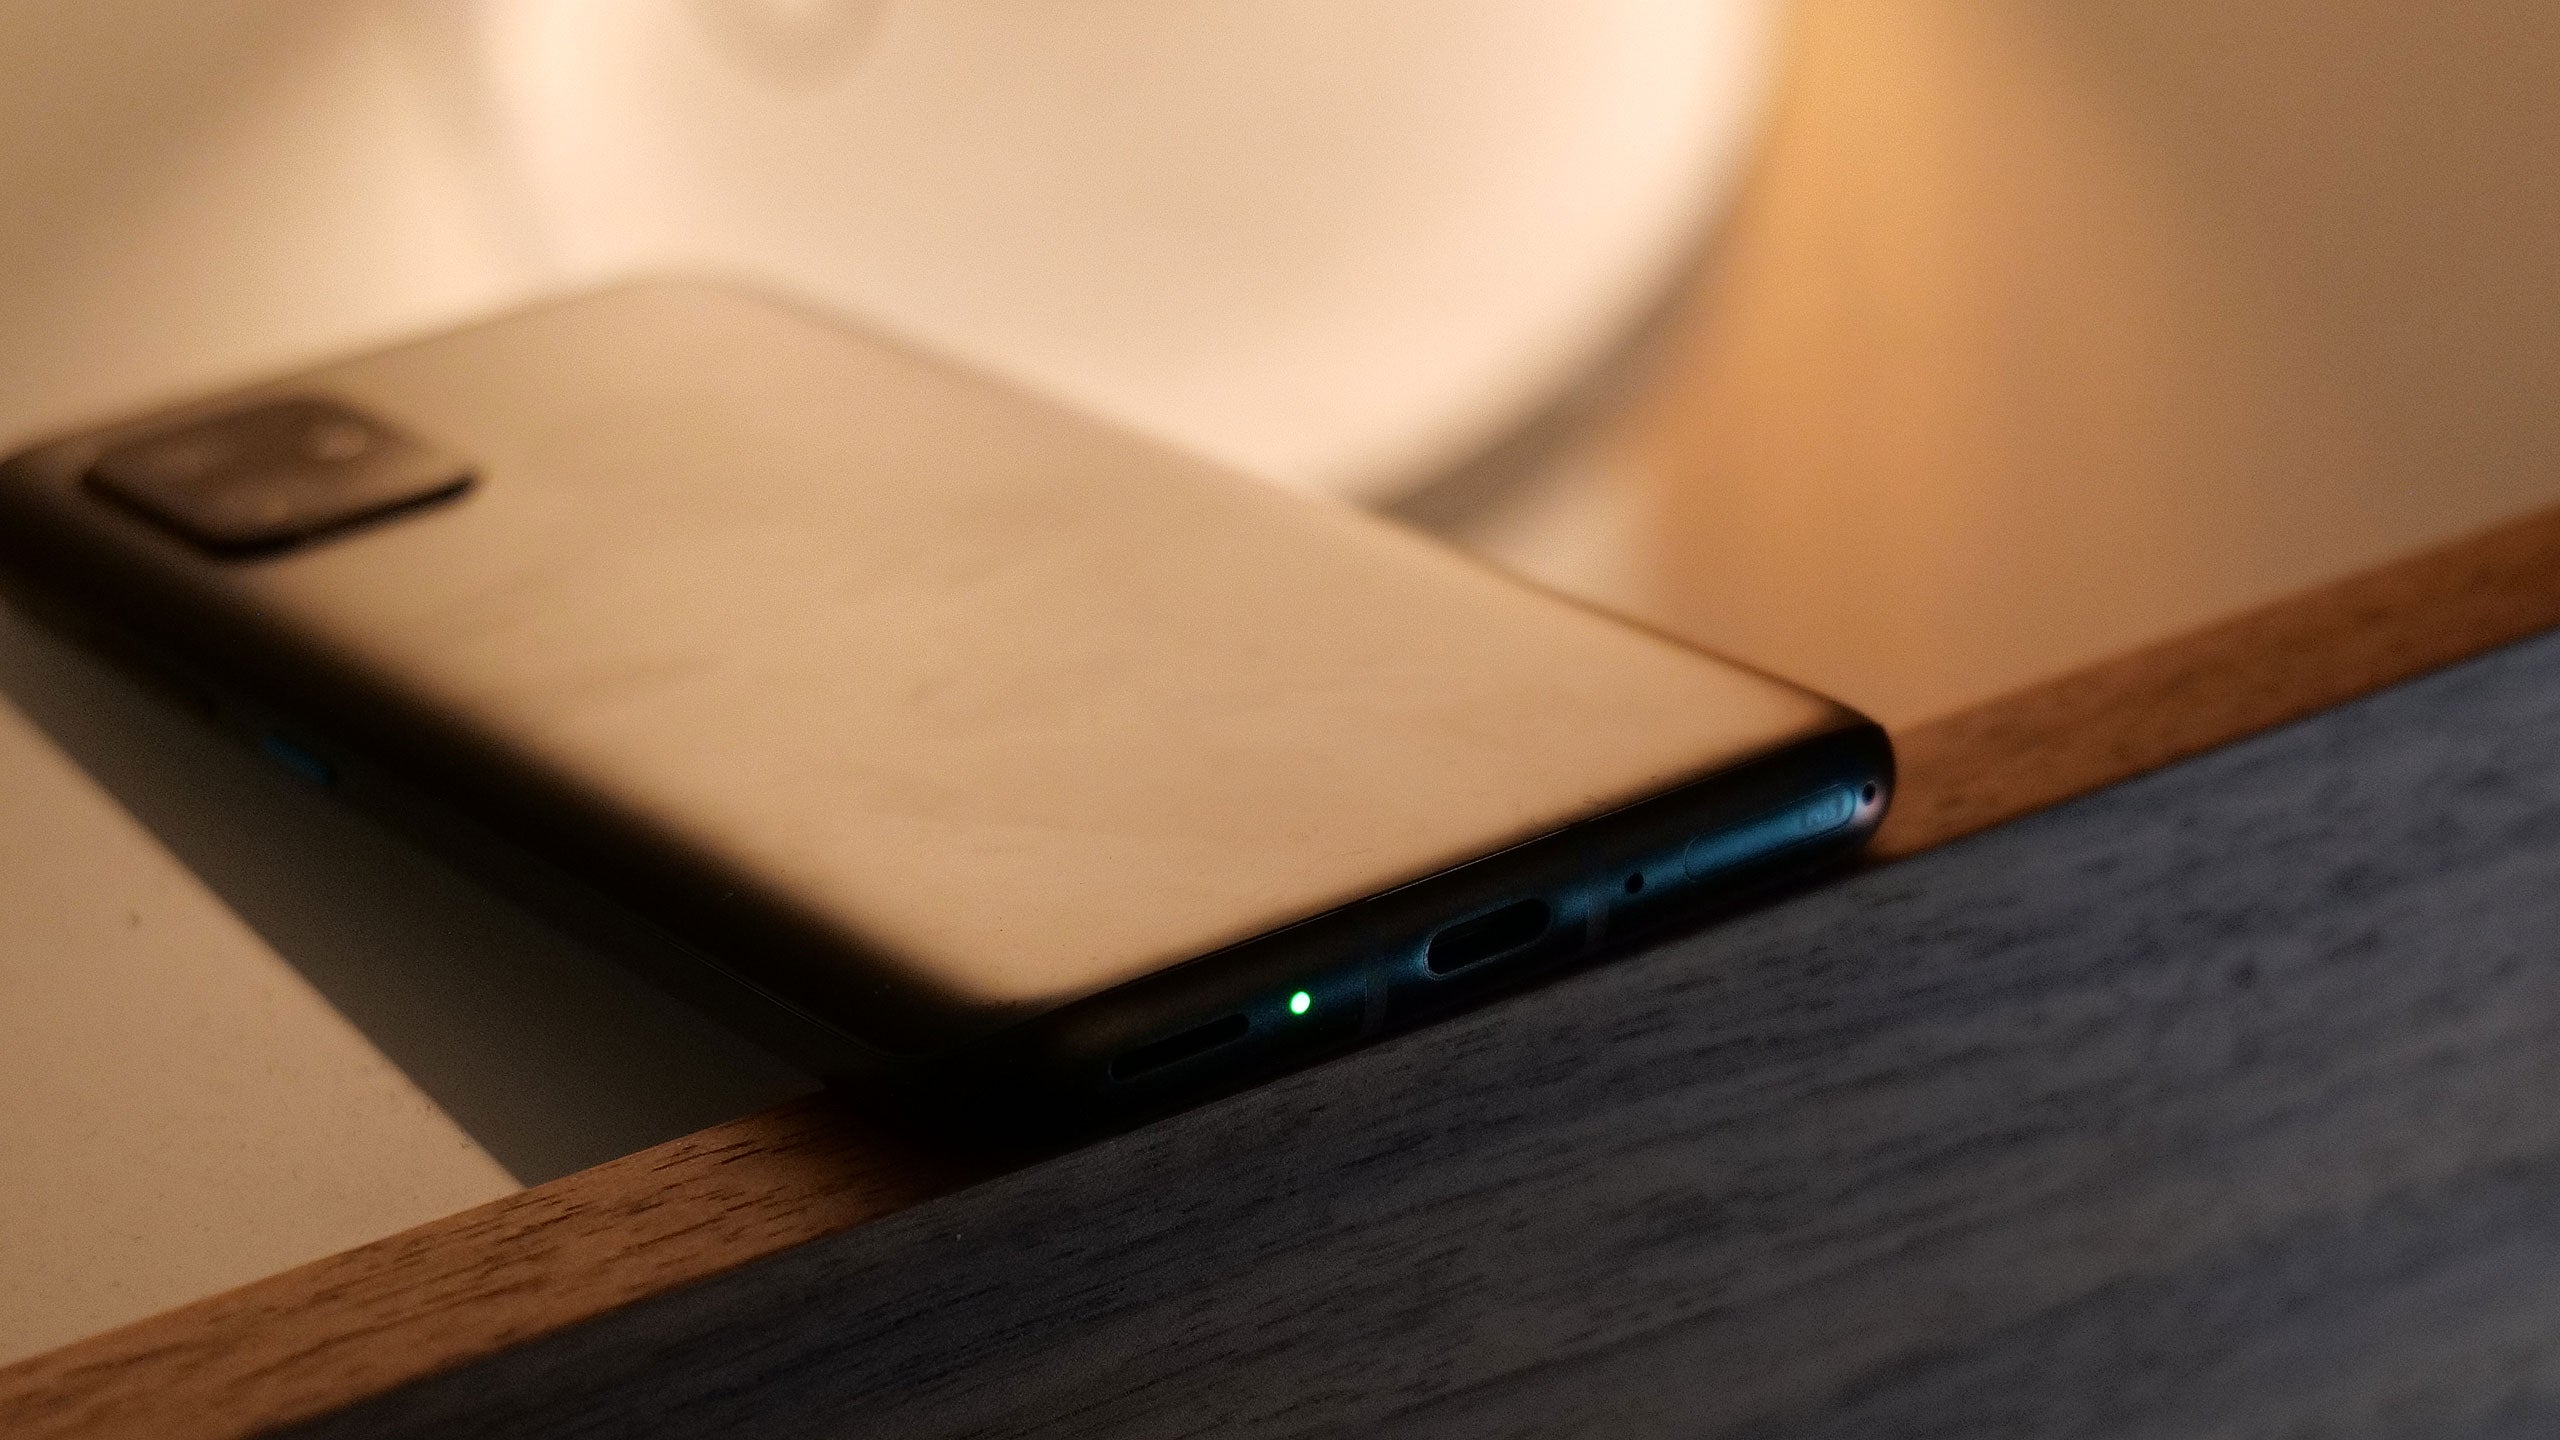 Another quirk about the Zenfone 8 is that is has a notification light on the bottom of the phone, which is highly unusual, but after using it for a bit, has kind of grown on me.  (Photo: Sam Rutherford)